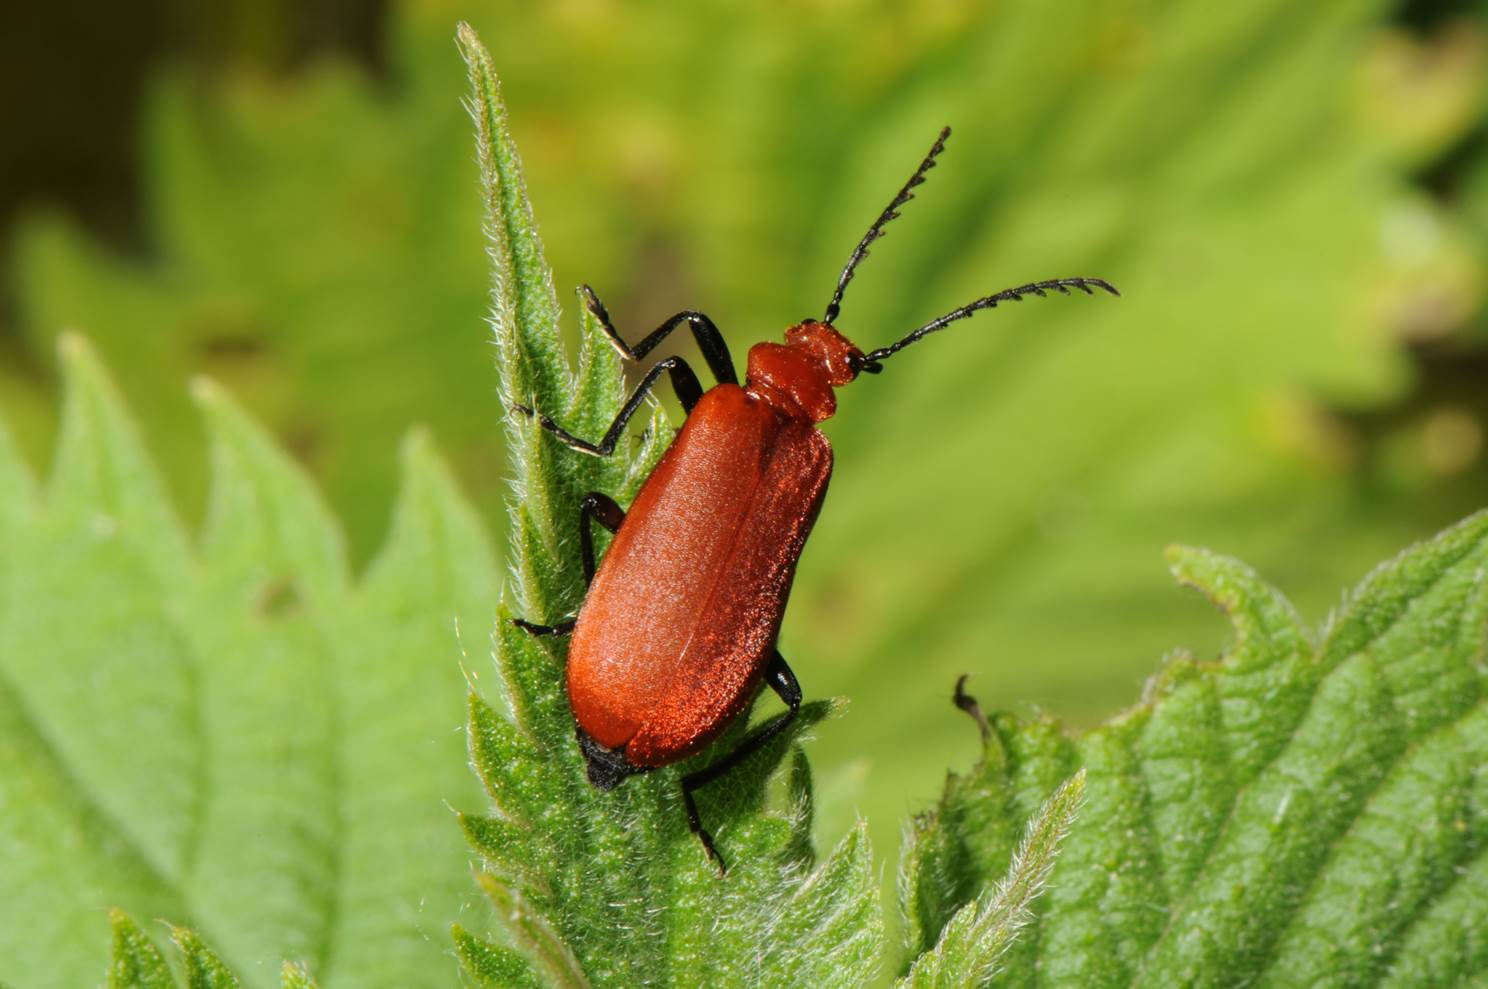 A red bug on a leaf

Description automatically generated with low confidence